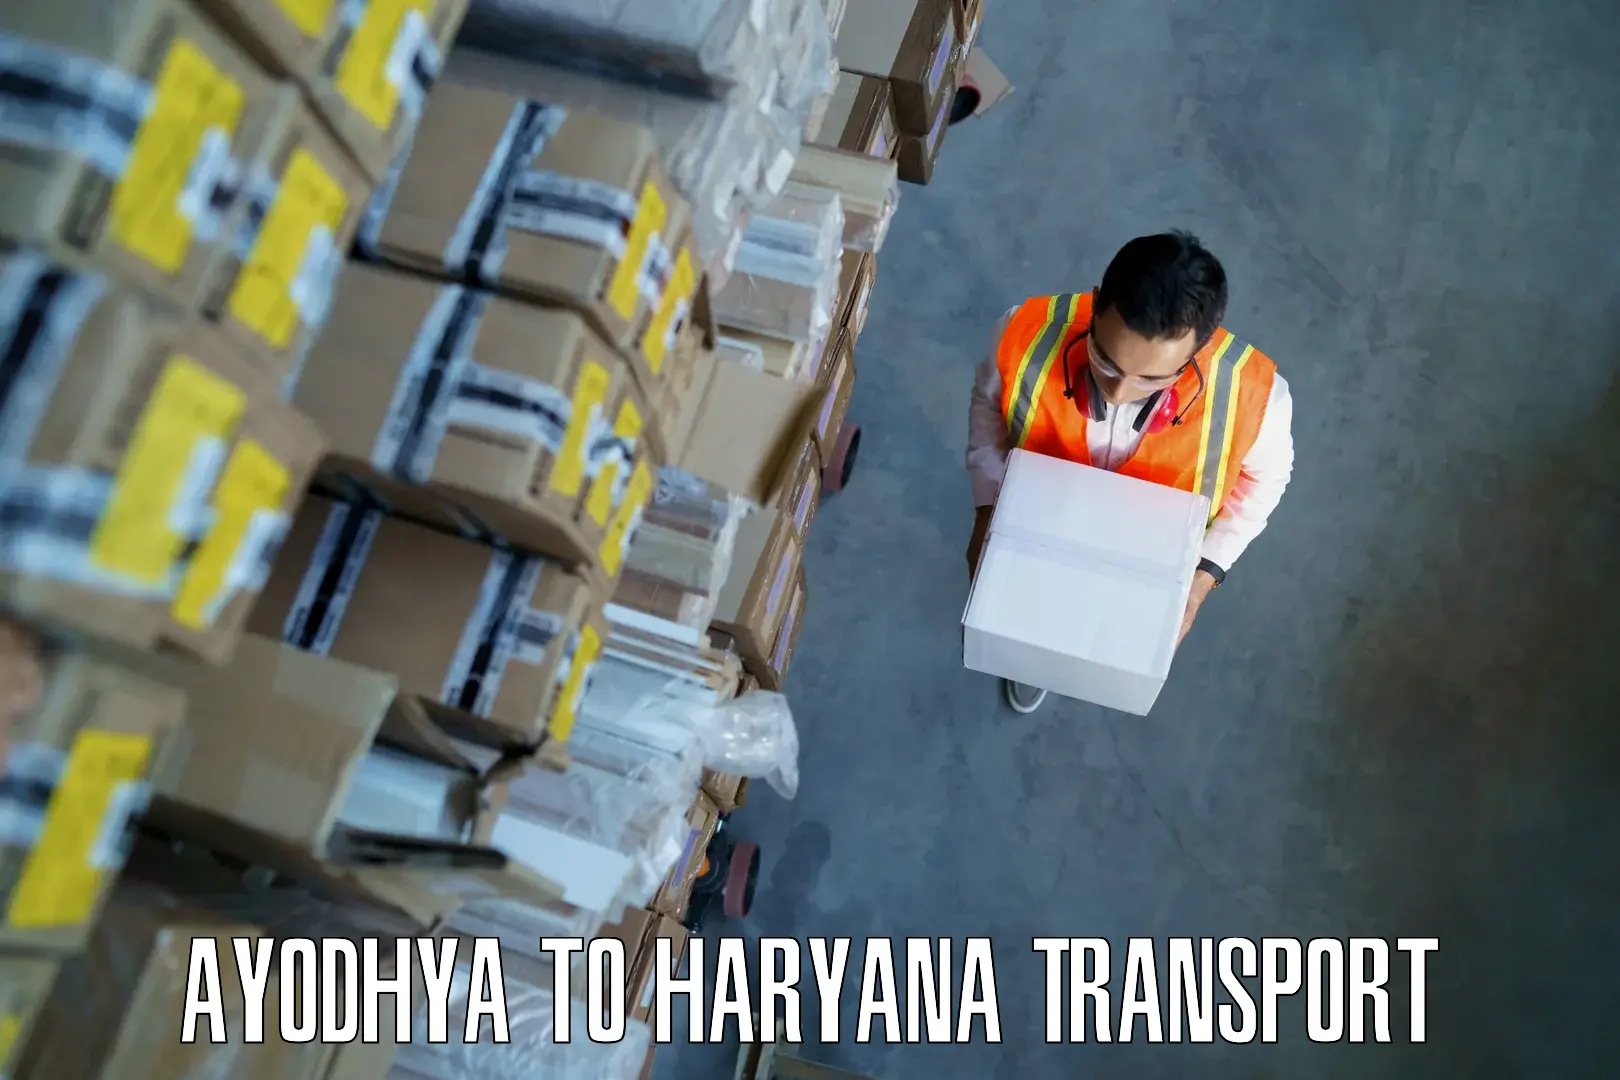 All India transport service Ayodhya to Gurgaon